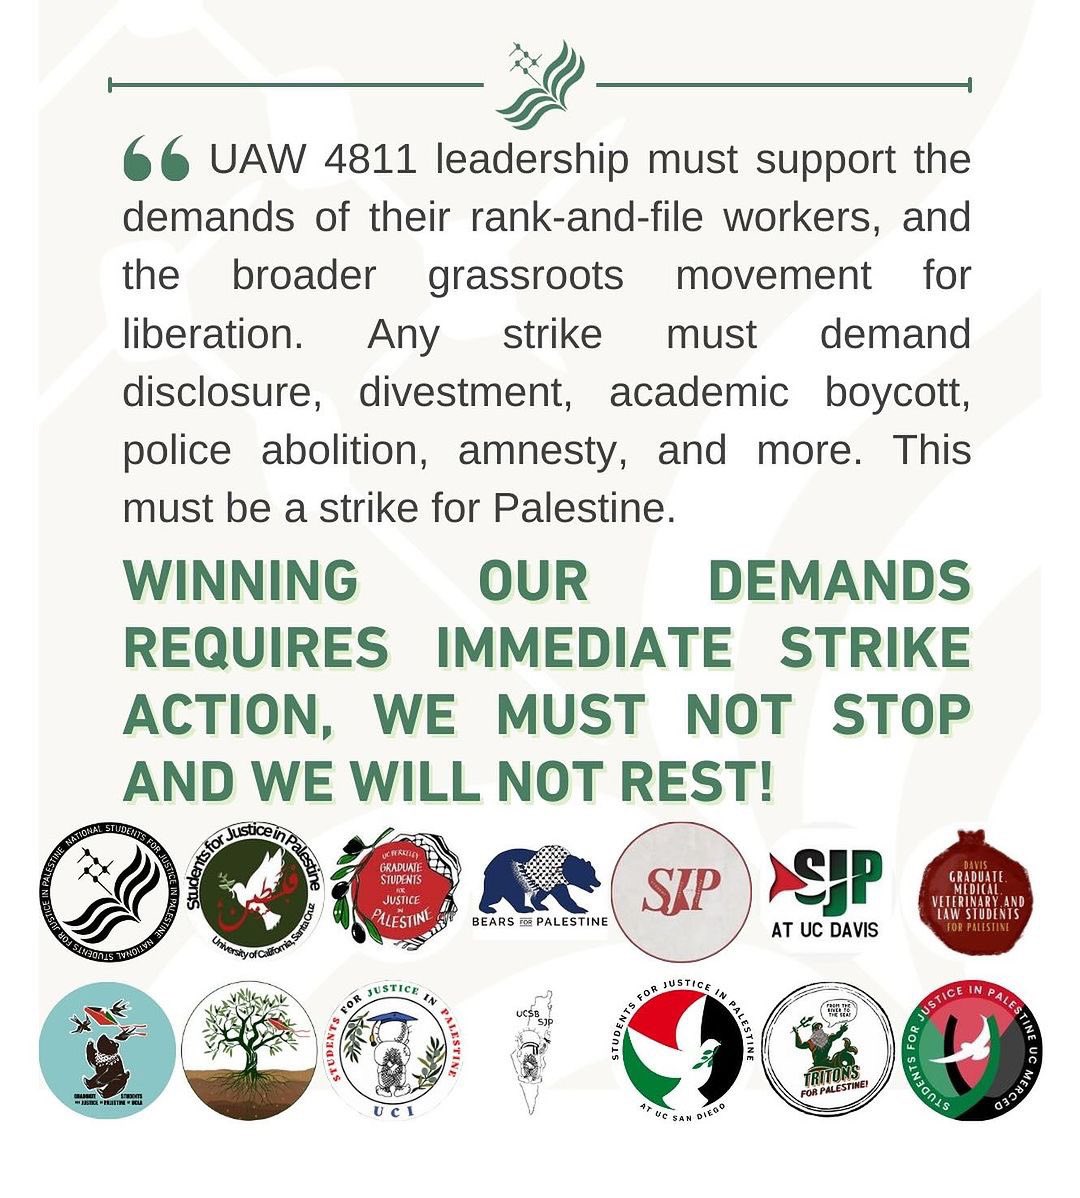 🚨UC SJP STATEMENT ON A STRIKE FOR PALESTINIAN LIBERATION🚨 “@uaw_4811 must immediately call a strike at all UC Campuses. Any strike must demand disclosure, divestment, academic boycott, police abolition, amnesty, and more. This must be a strike for Palestine.”